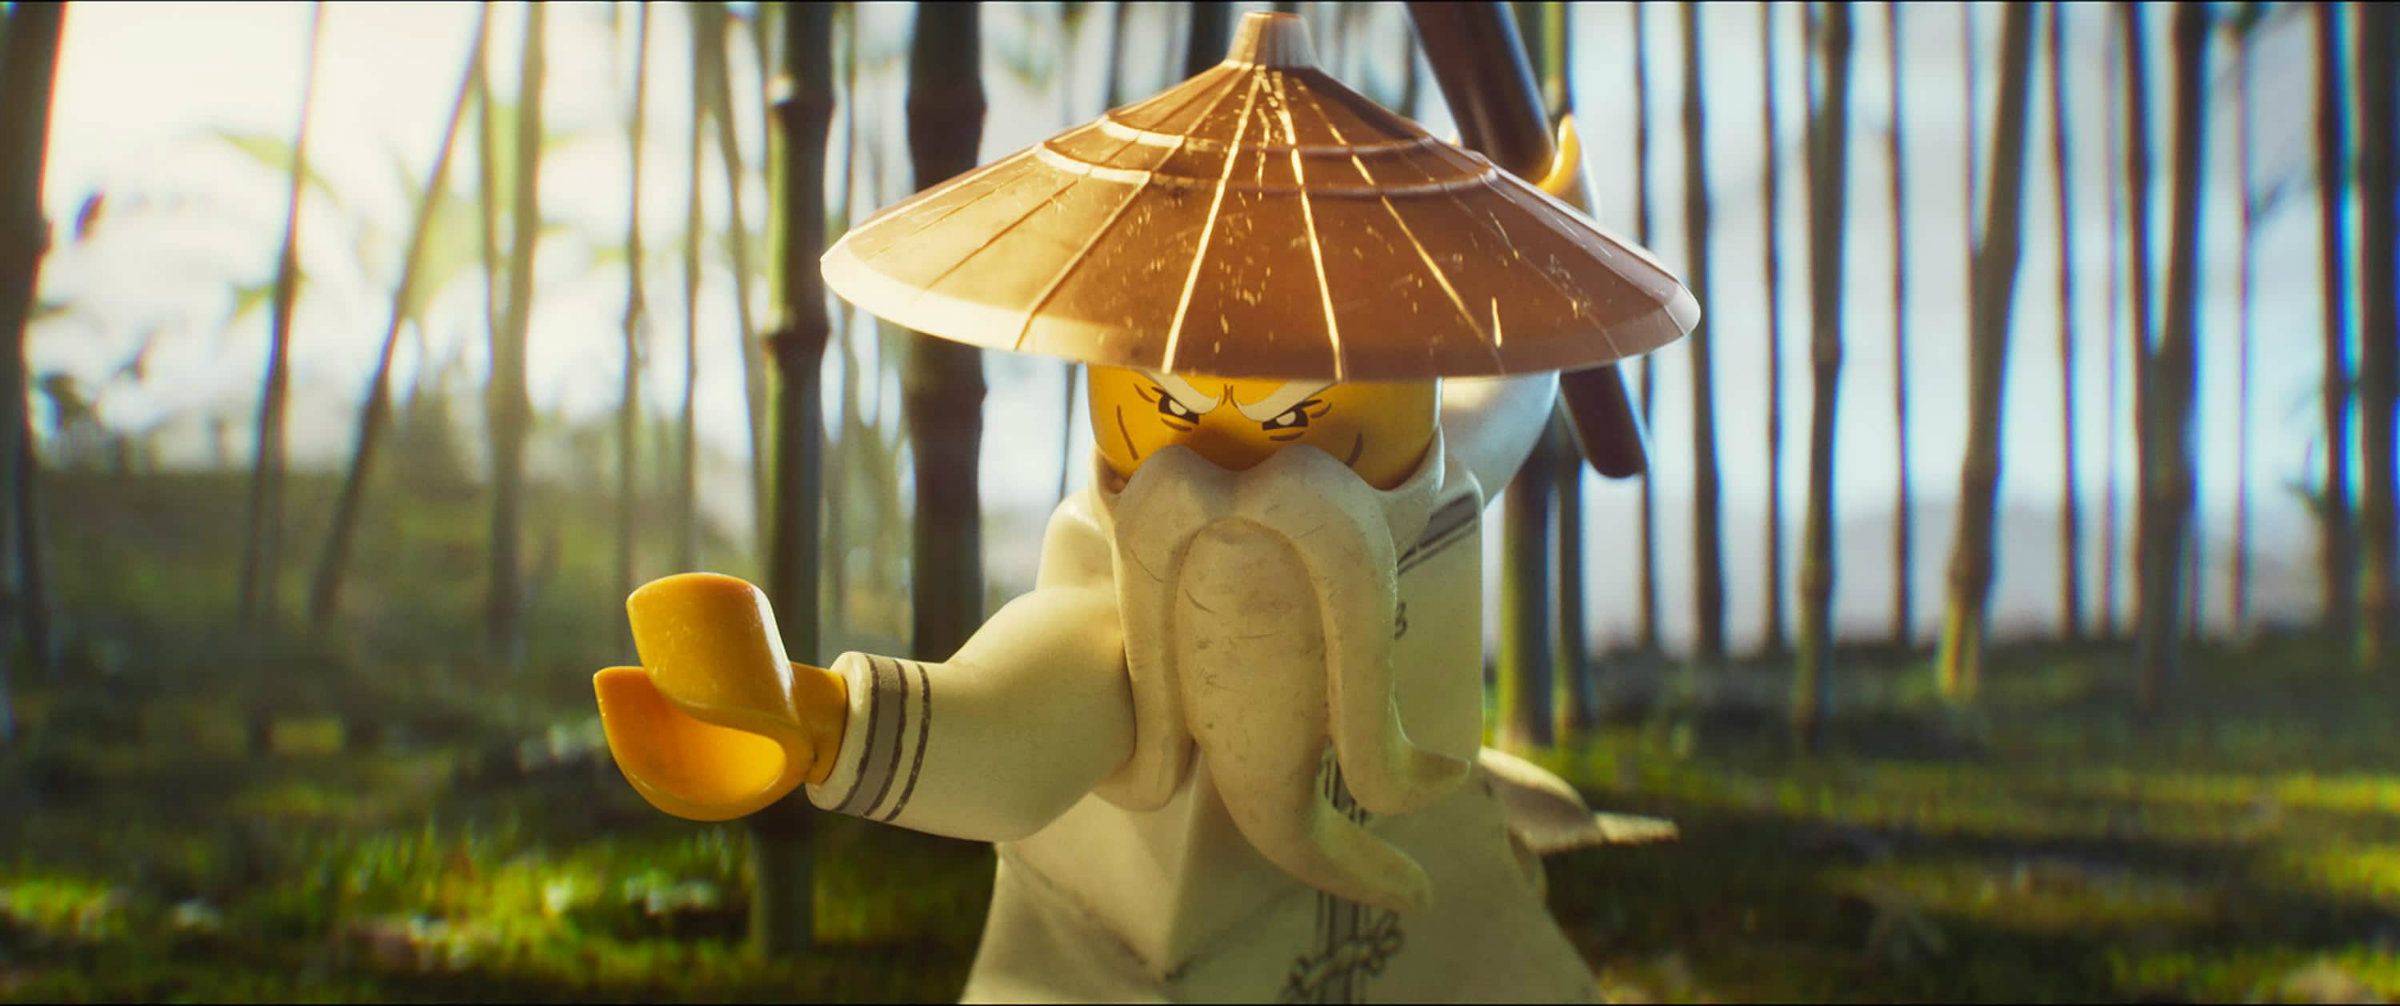 LEGO Ninjago Movie Images Reveal Master Wu and His Squad